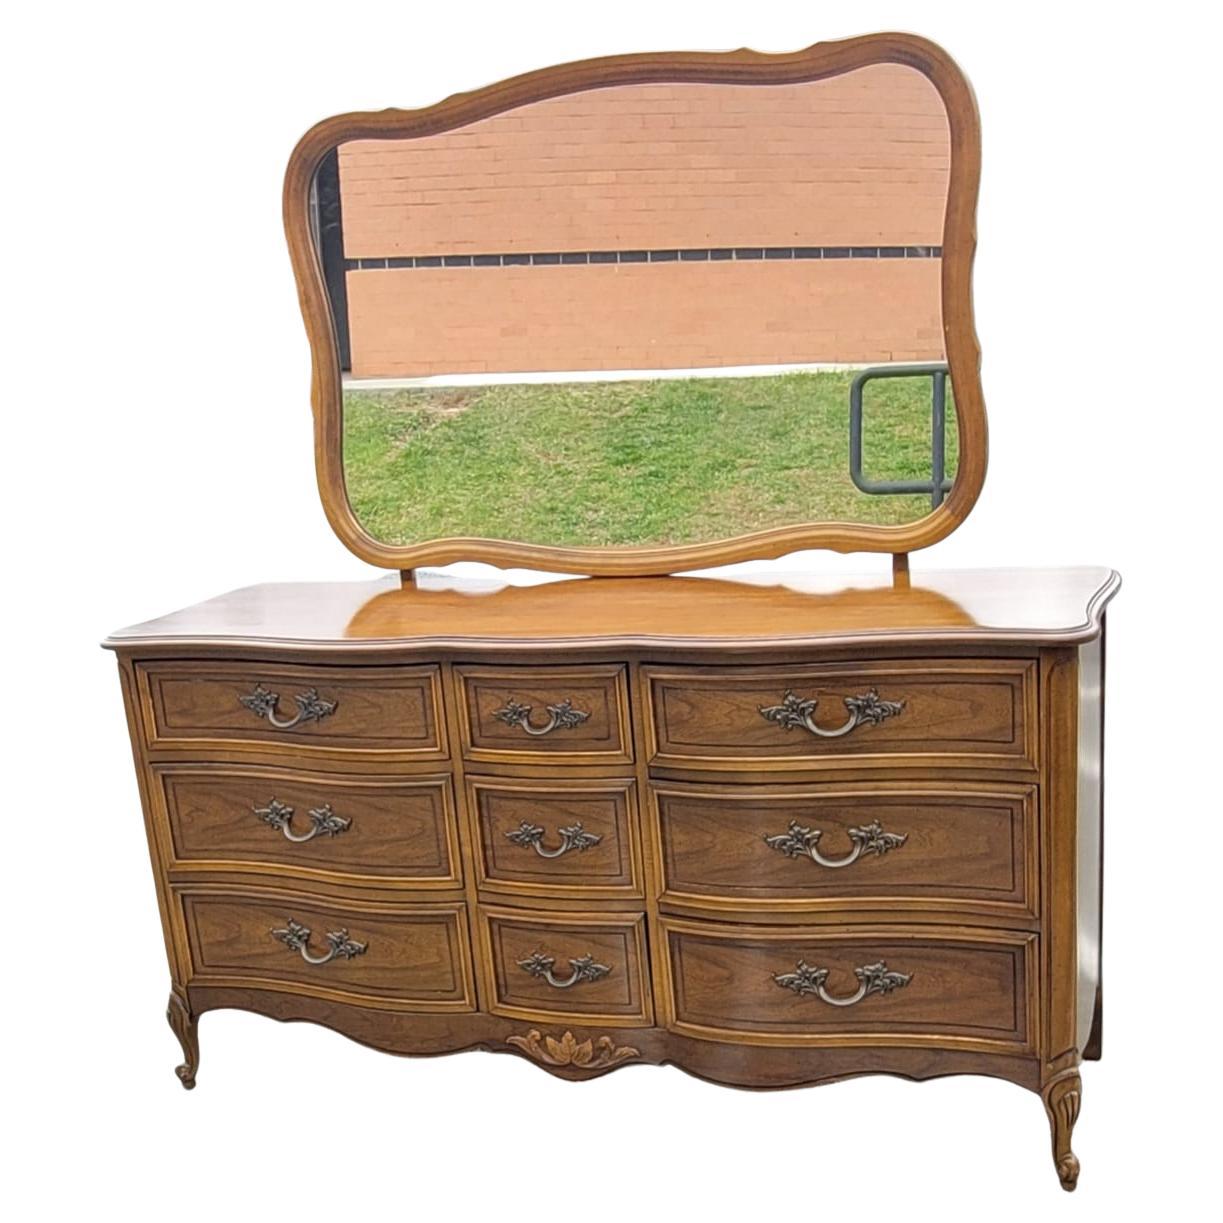 Dixie Provincial Style Walnut Fruitwood Triple Dresser With Mirror. Very solid construction with original French drawer pulls and featuring 9 drawers, all with hand-cut dovetail joints construction and functioning as originally intended. Mirror